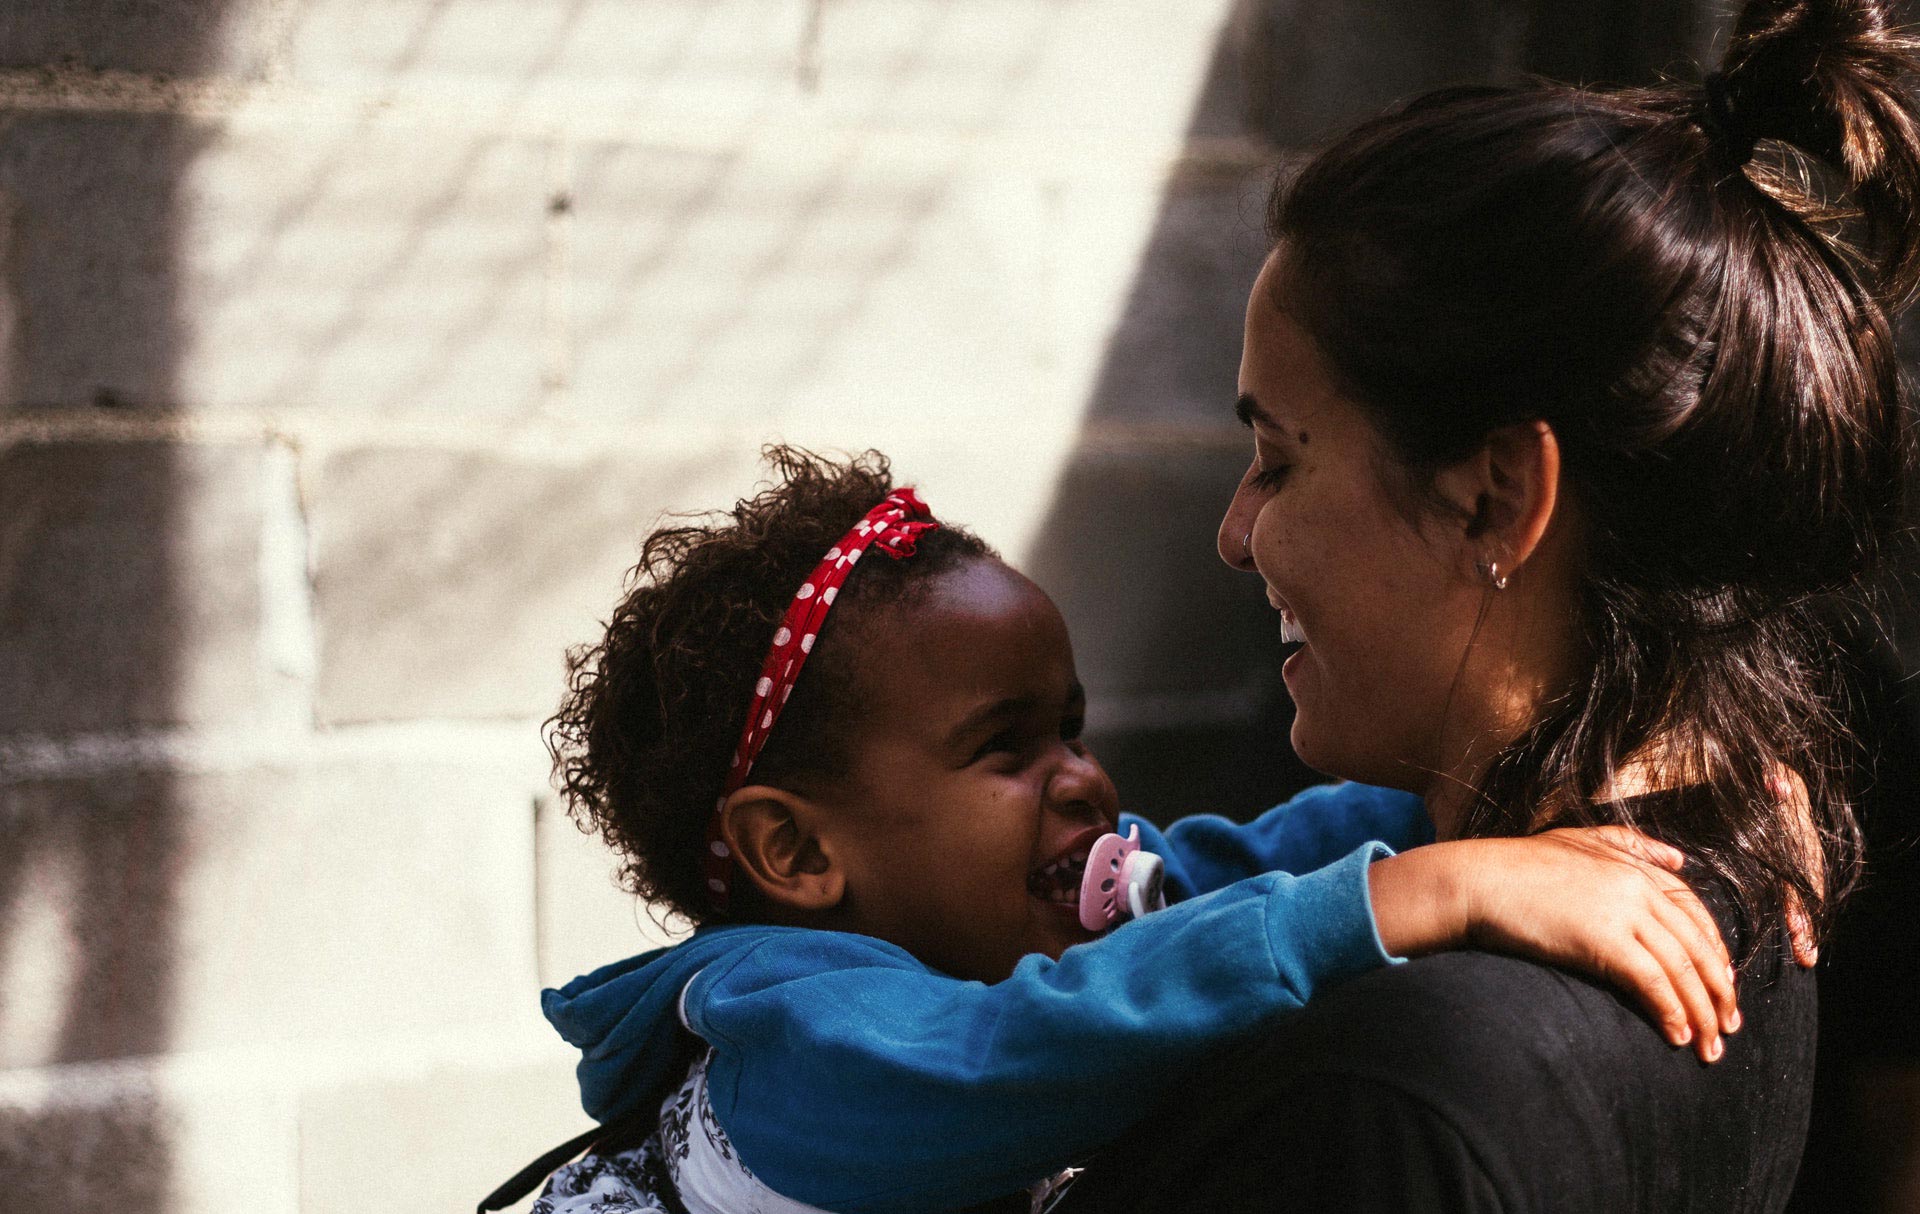 Smiling woman holding a happy child